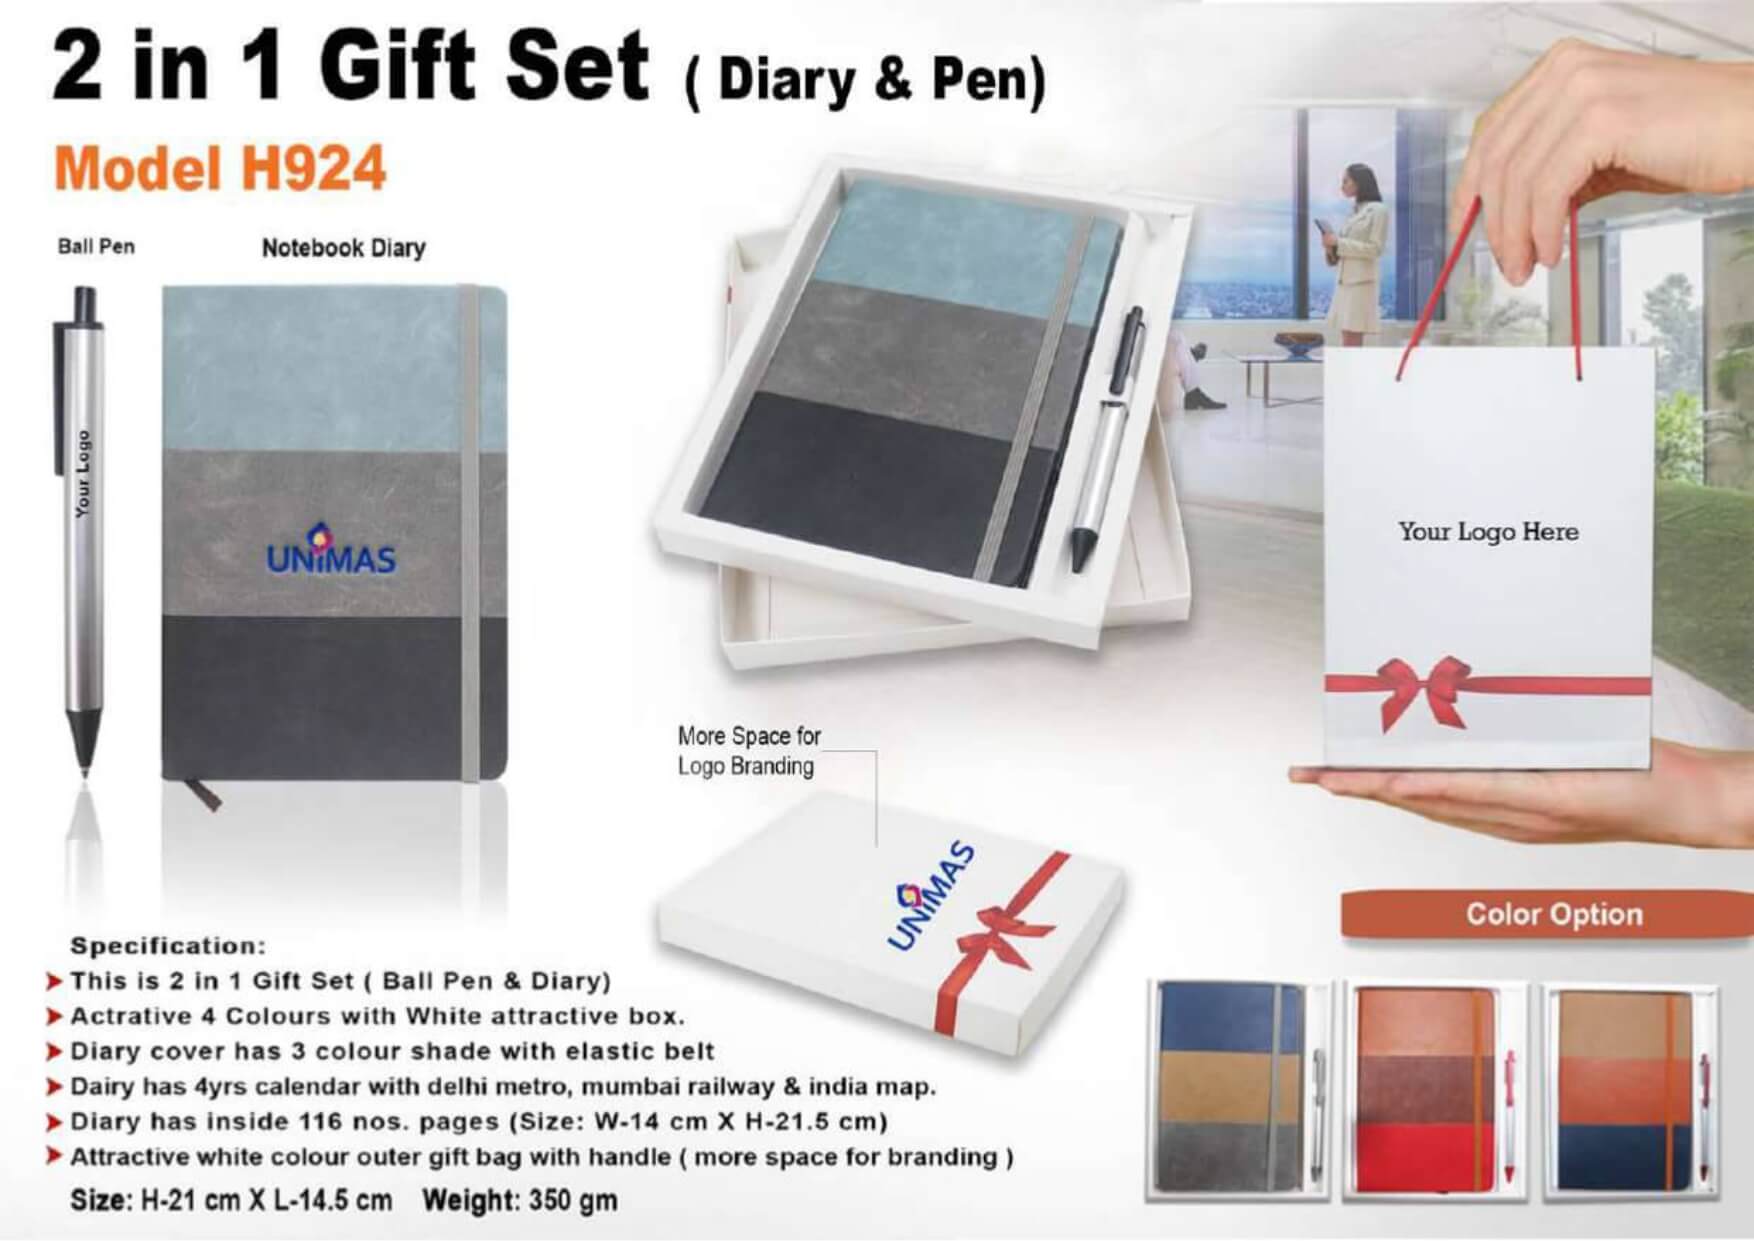 Diary and Pen 2 in 1 Gift Set 924